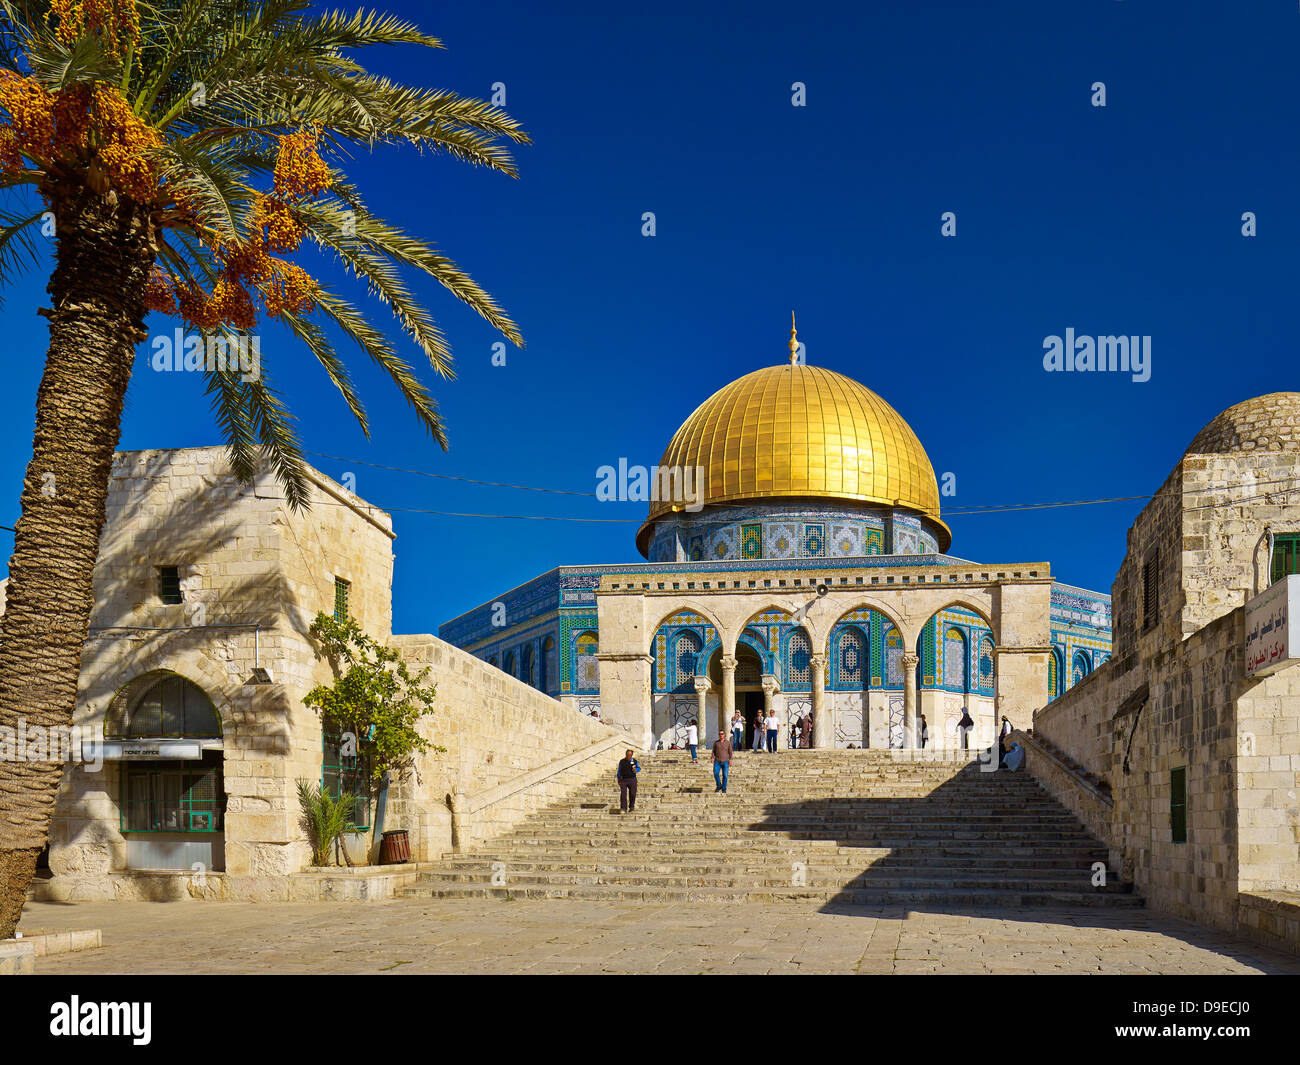 Dome of the Rock on the Temple Mount in Jerusalem, Israel Stock Photo